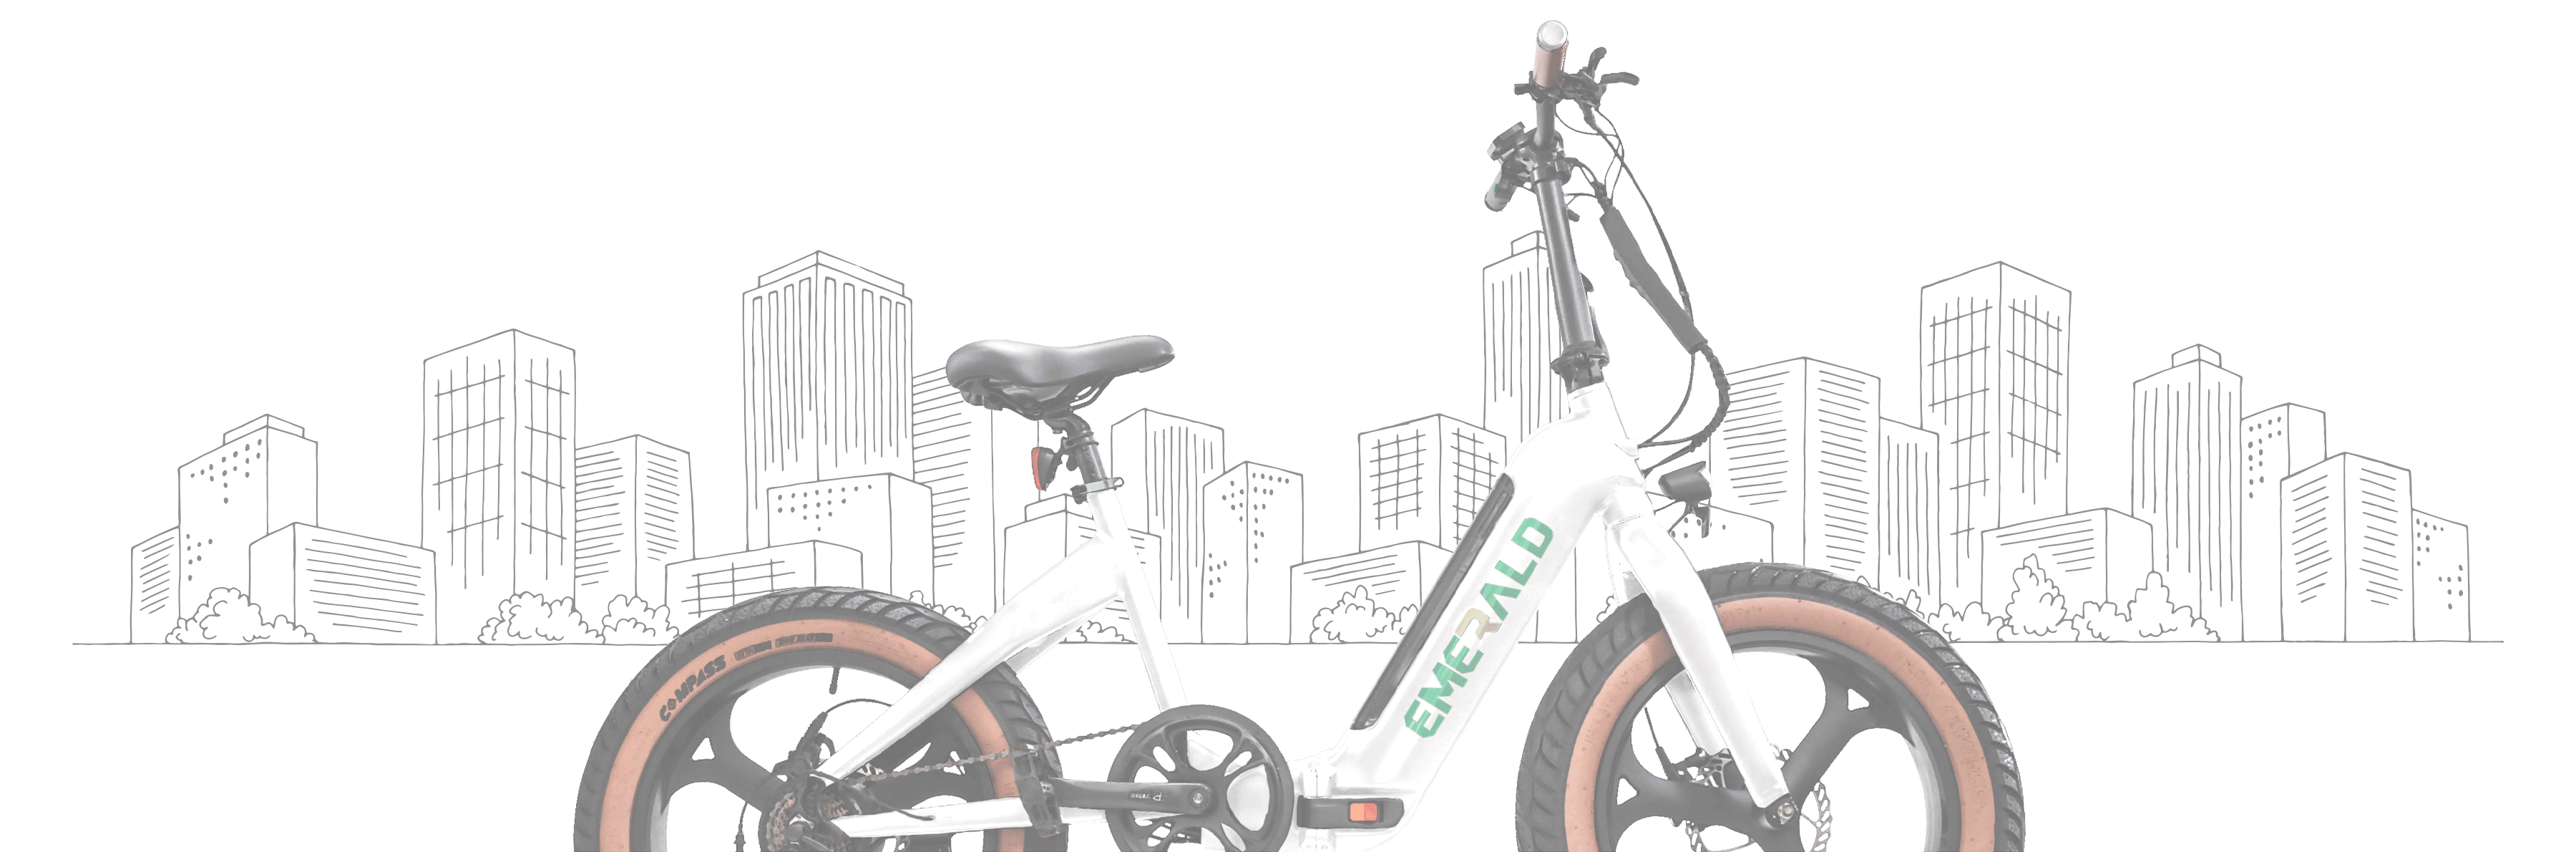 black version of the emerald ebike in front of a sketch of a city